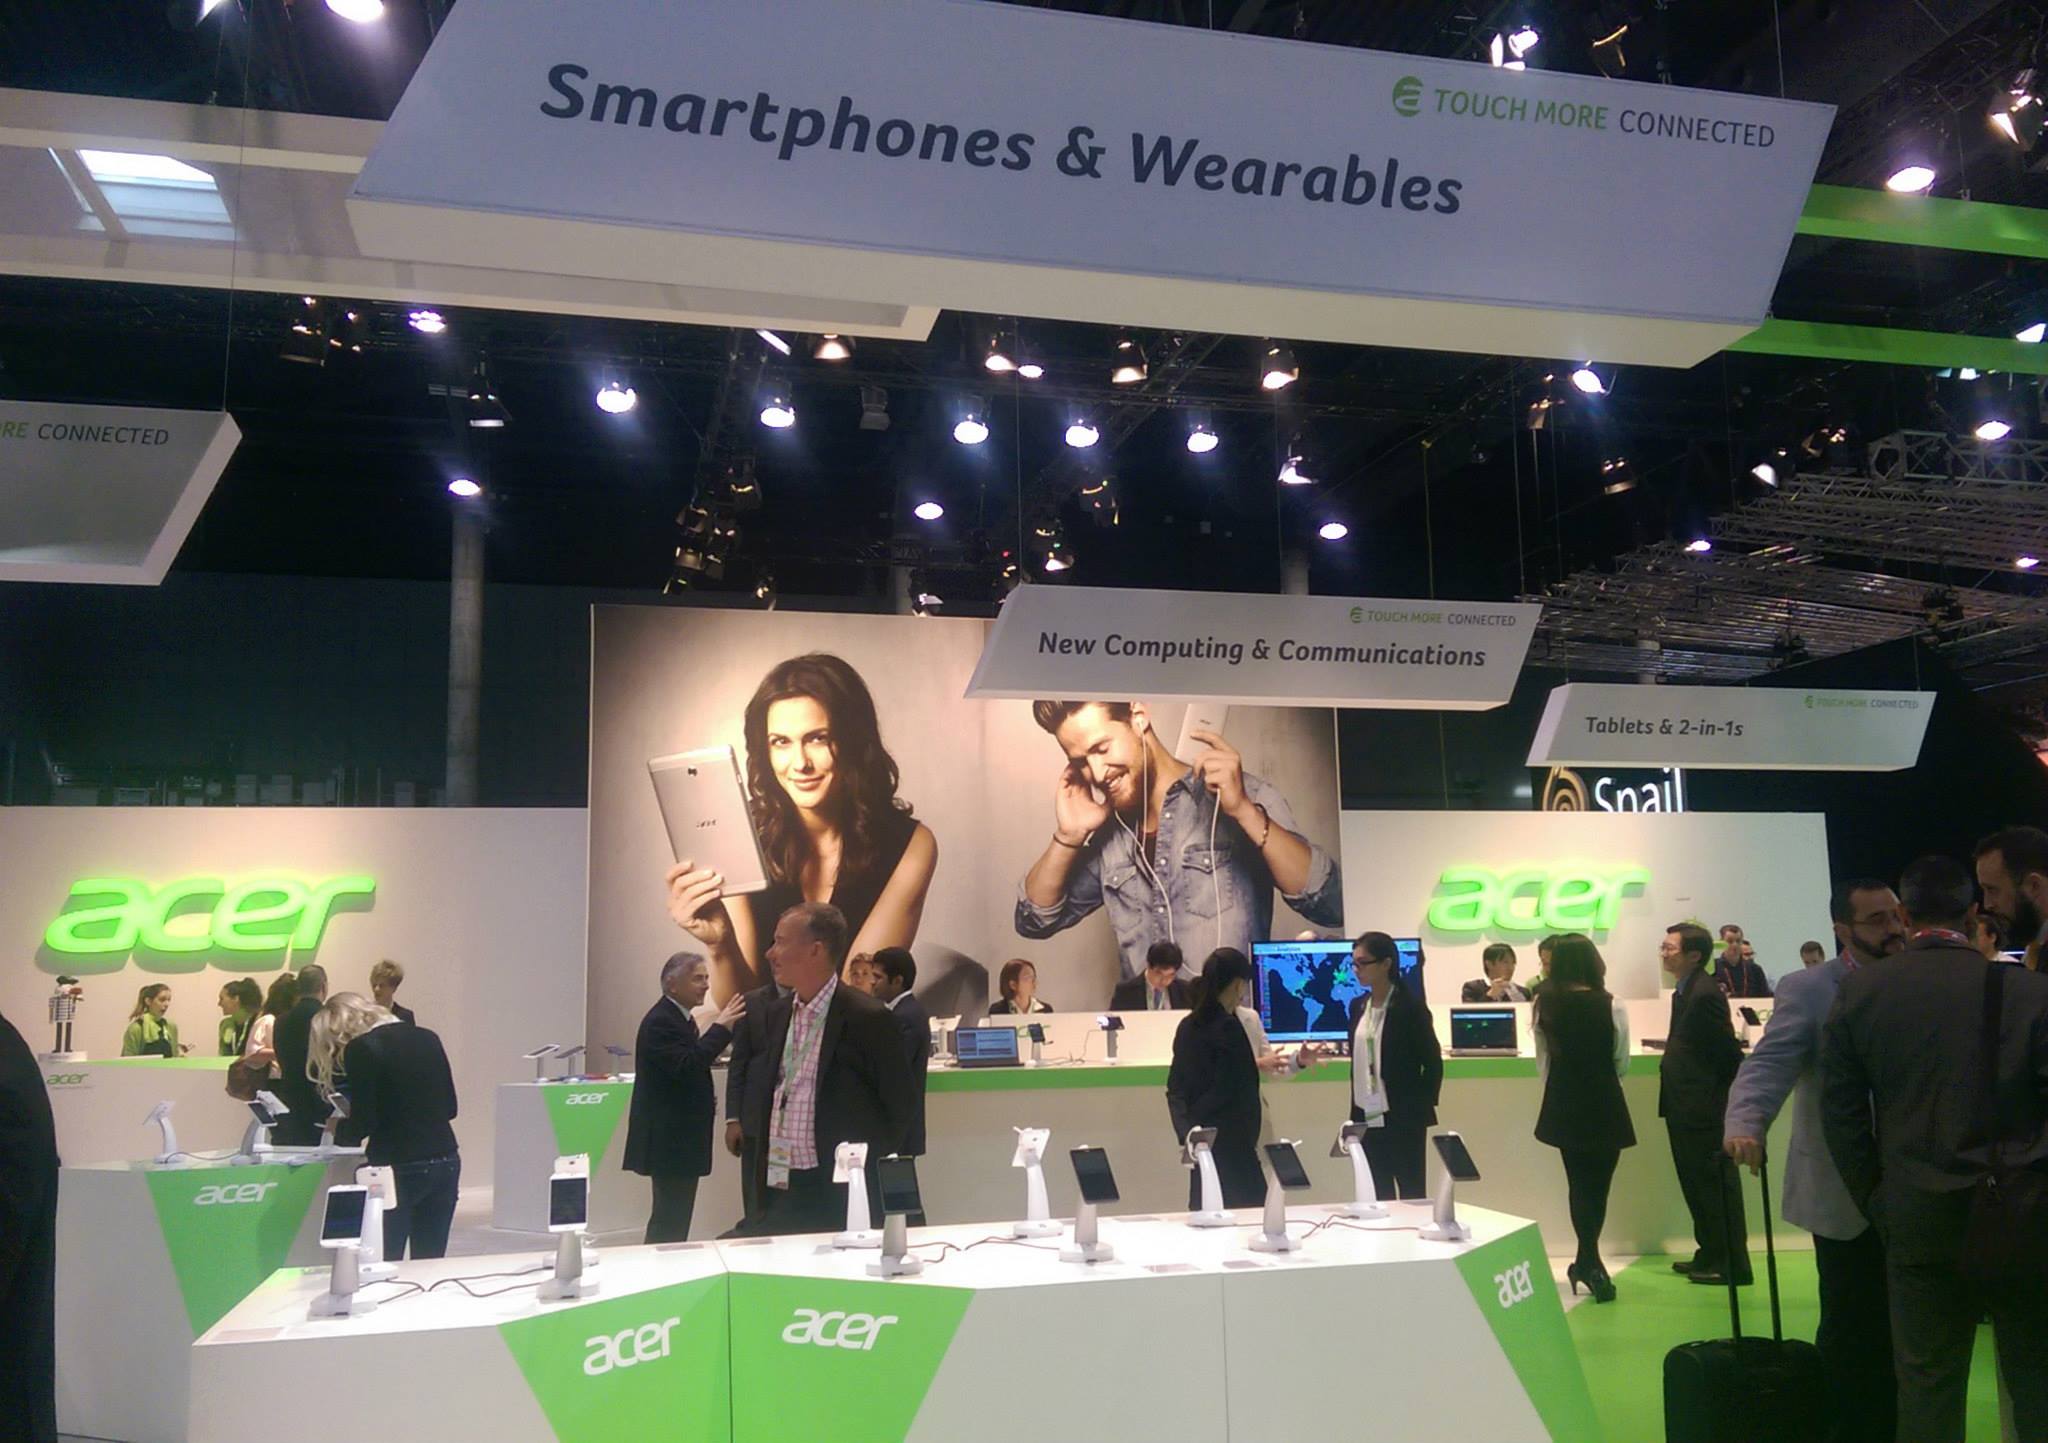 To stand της Acer με smartphones, wearables, laptops και tablet 2 σε 1